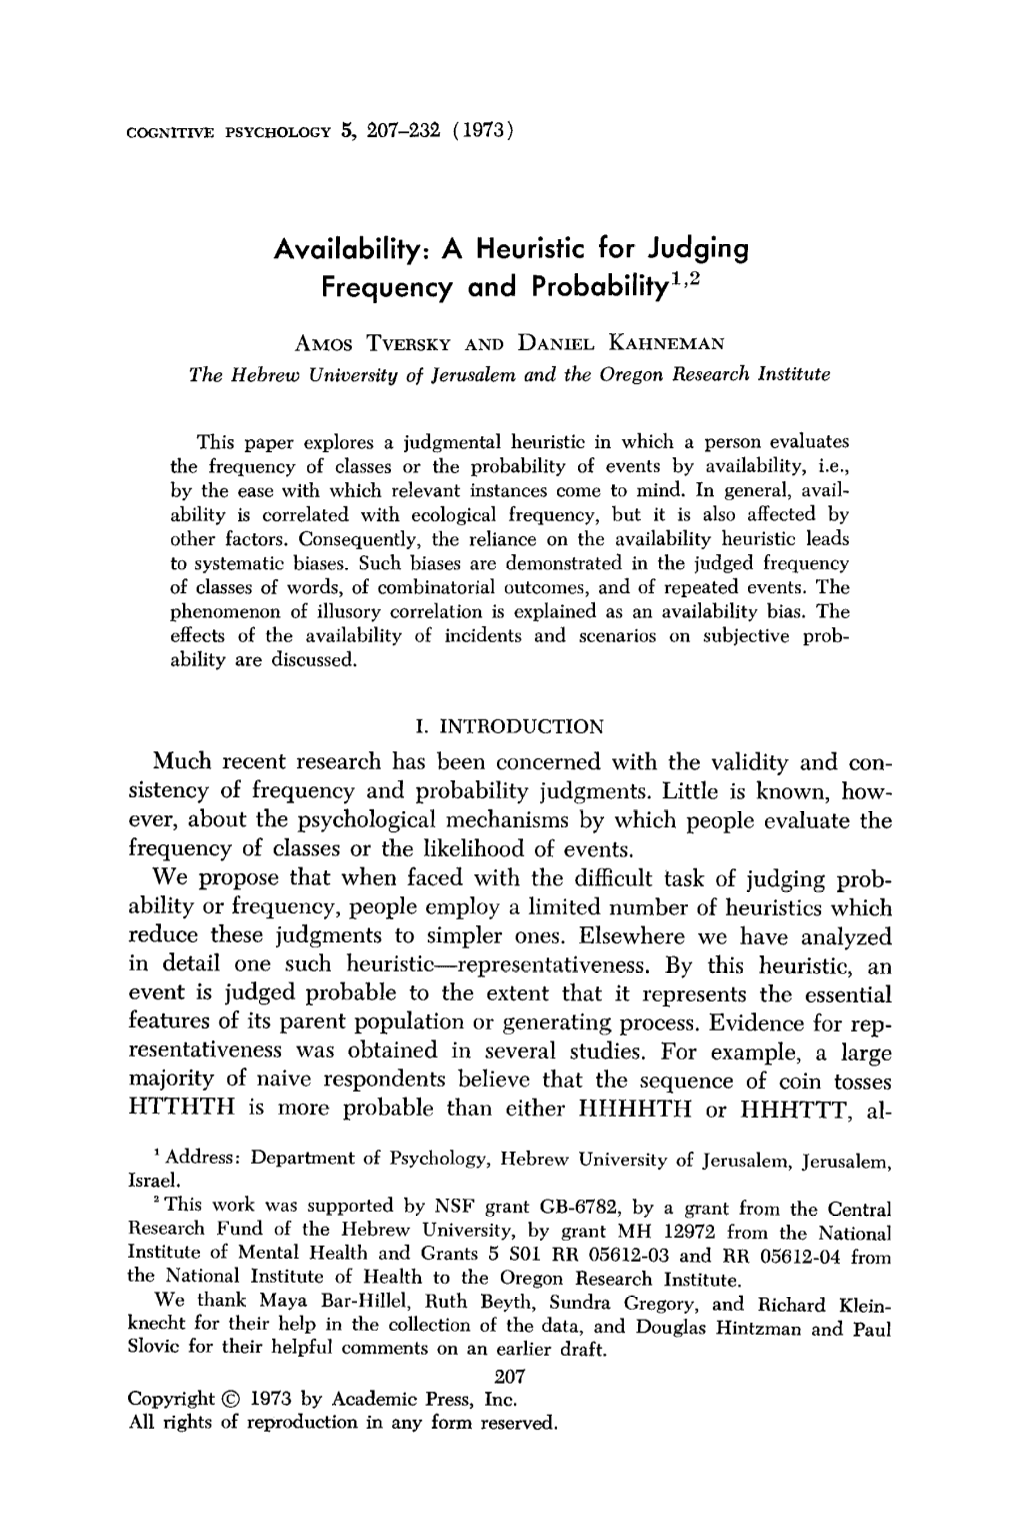 Availability: a Heuristic for Judging Frequency and Probability122